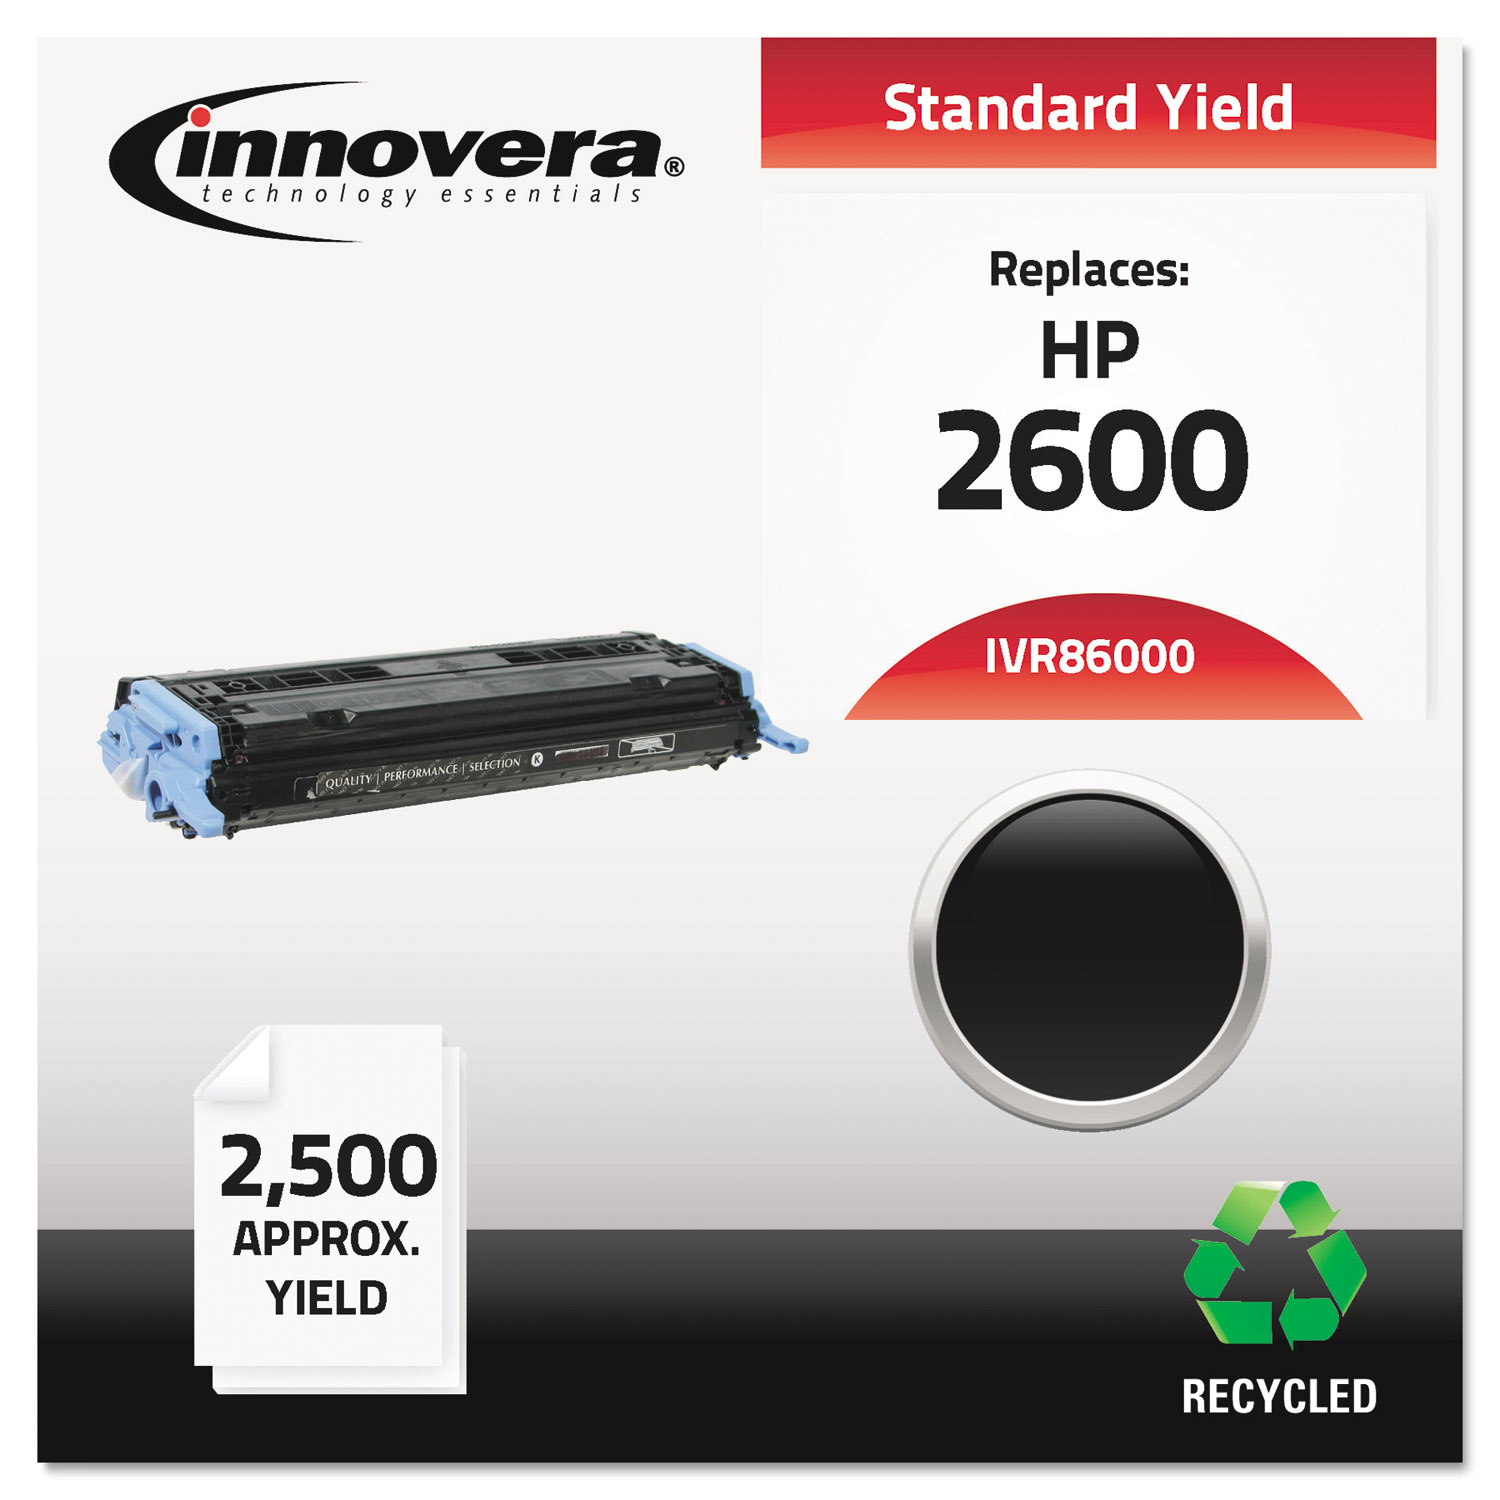 Remanufactured Q6000A (124A) Toner, 2500 Page-Yield, Black